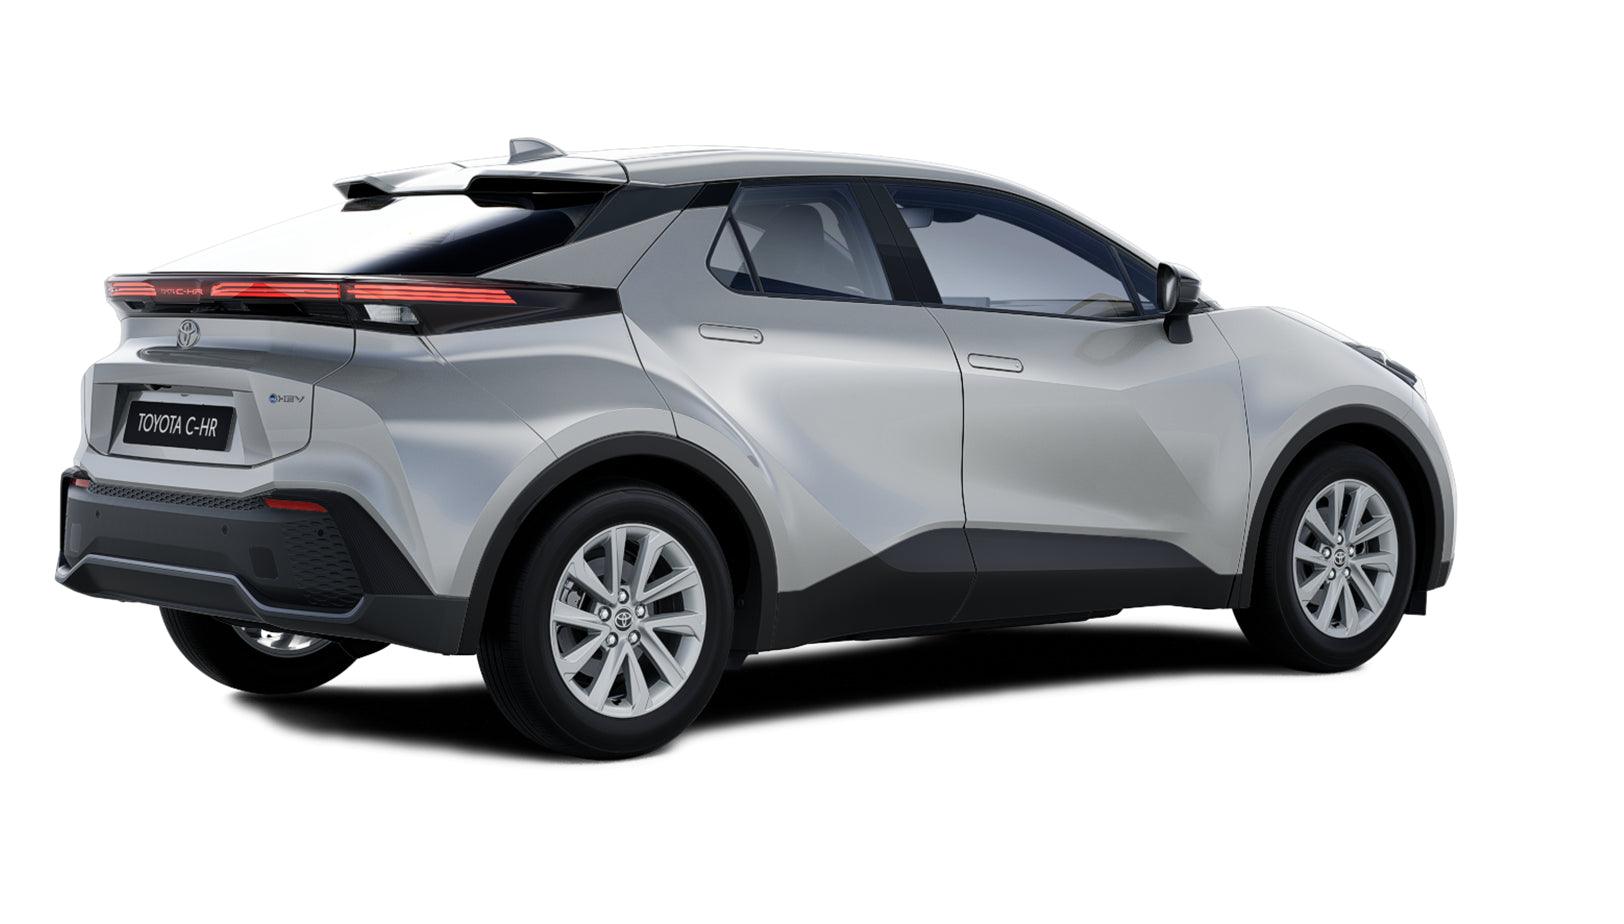 Toyota C-HR 1.8 HEV FWD Active Silver - Toyota Promo